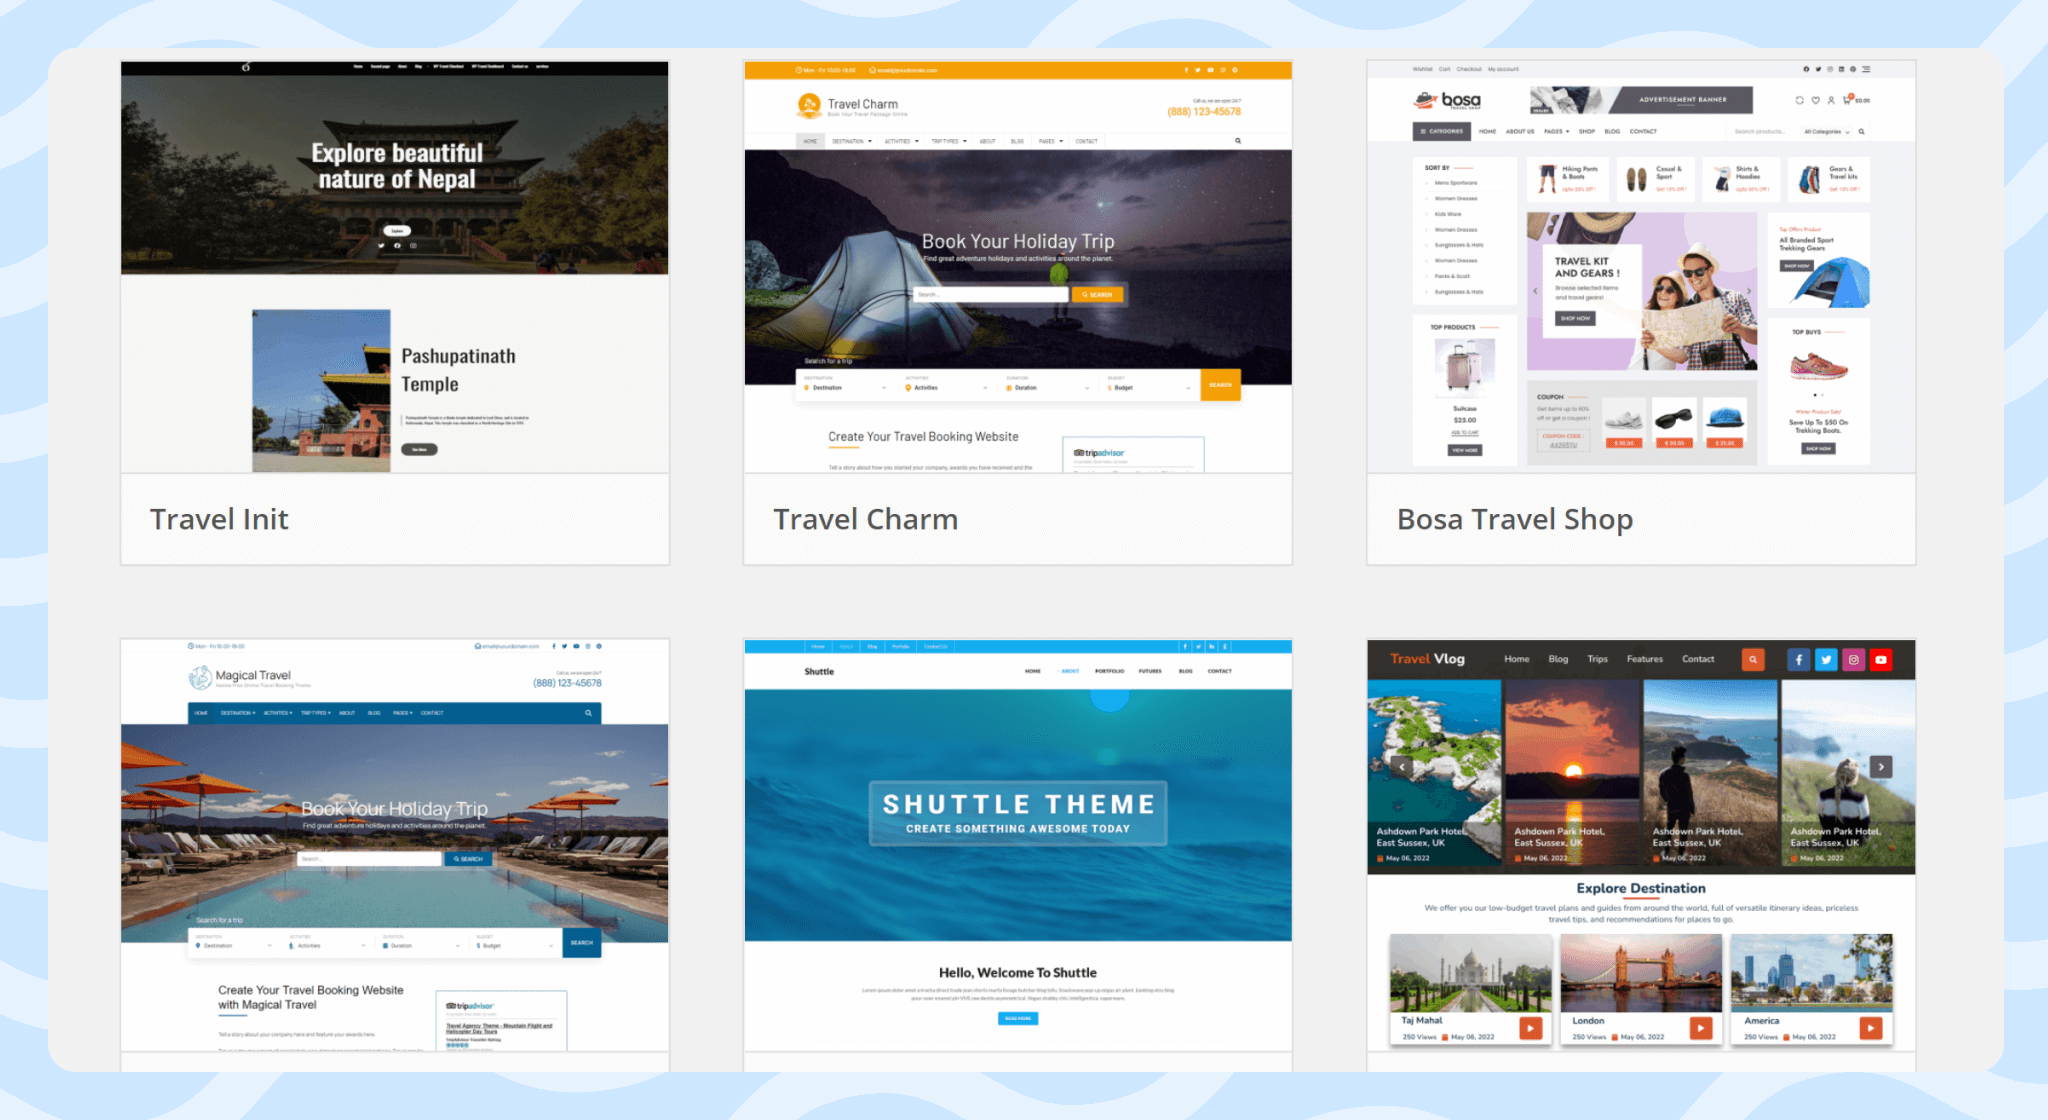 An example of free themes for a travel blog